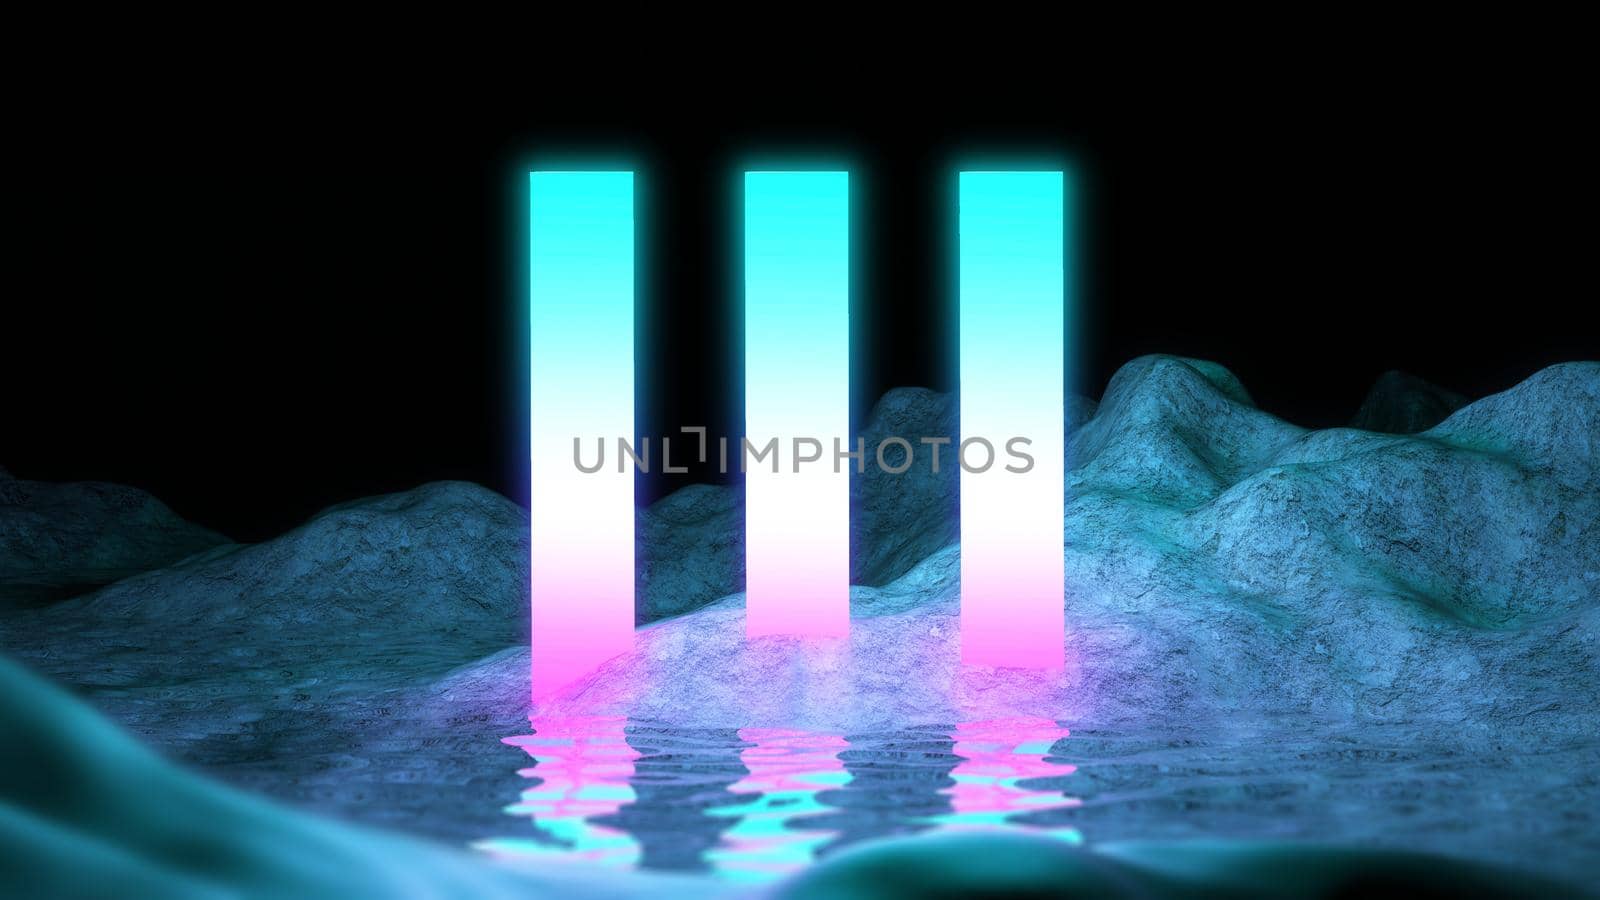 Cosmic background, alien landscape retro neon mountain with water violet reflection. Pink blue abstract futuristic space background for electronic game with rectangle frame glowing.Technology science mountain landscape. by DmytroRazinkov